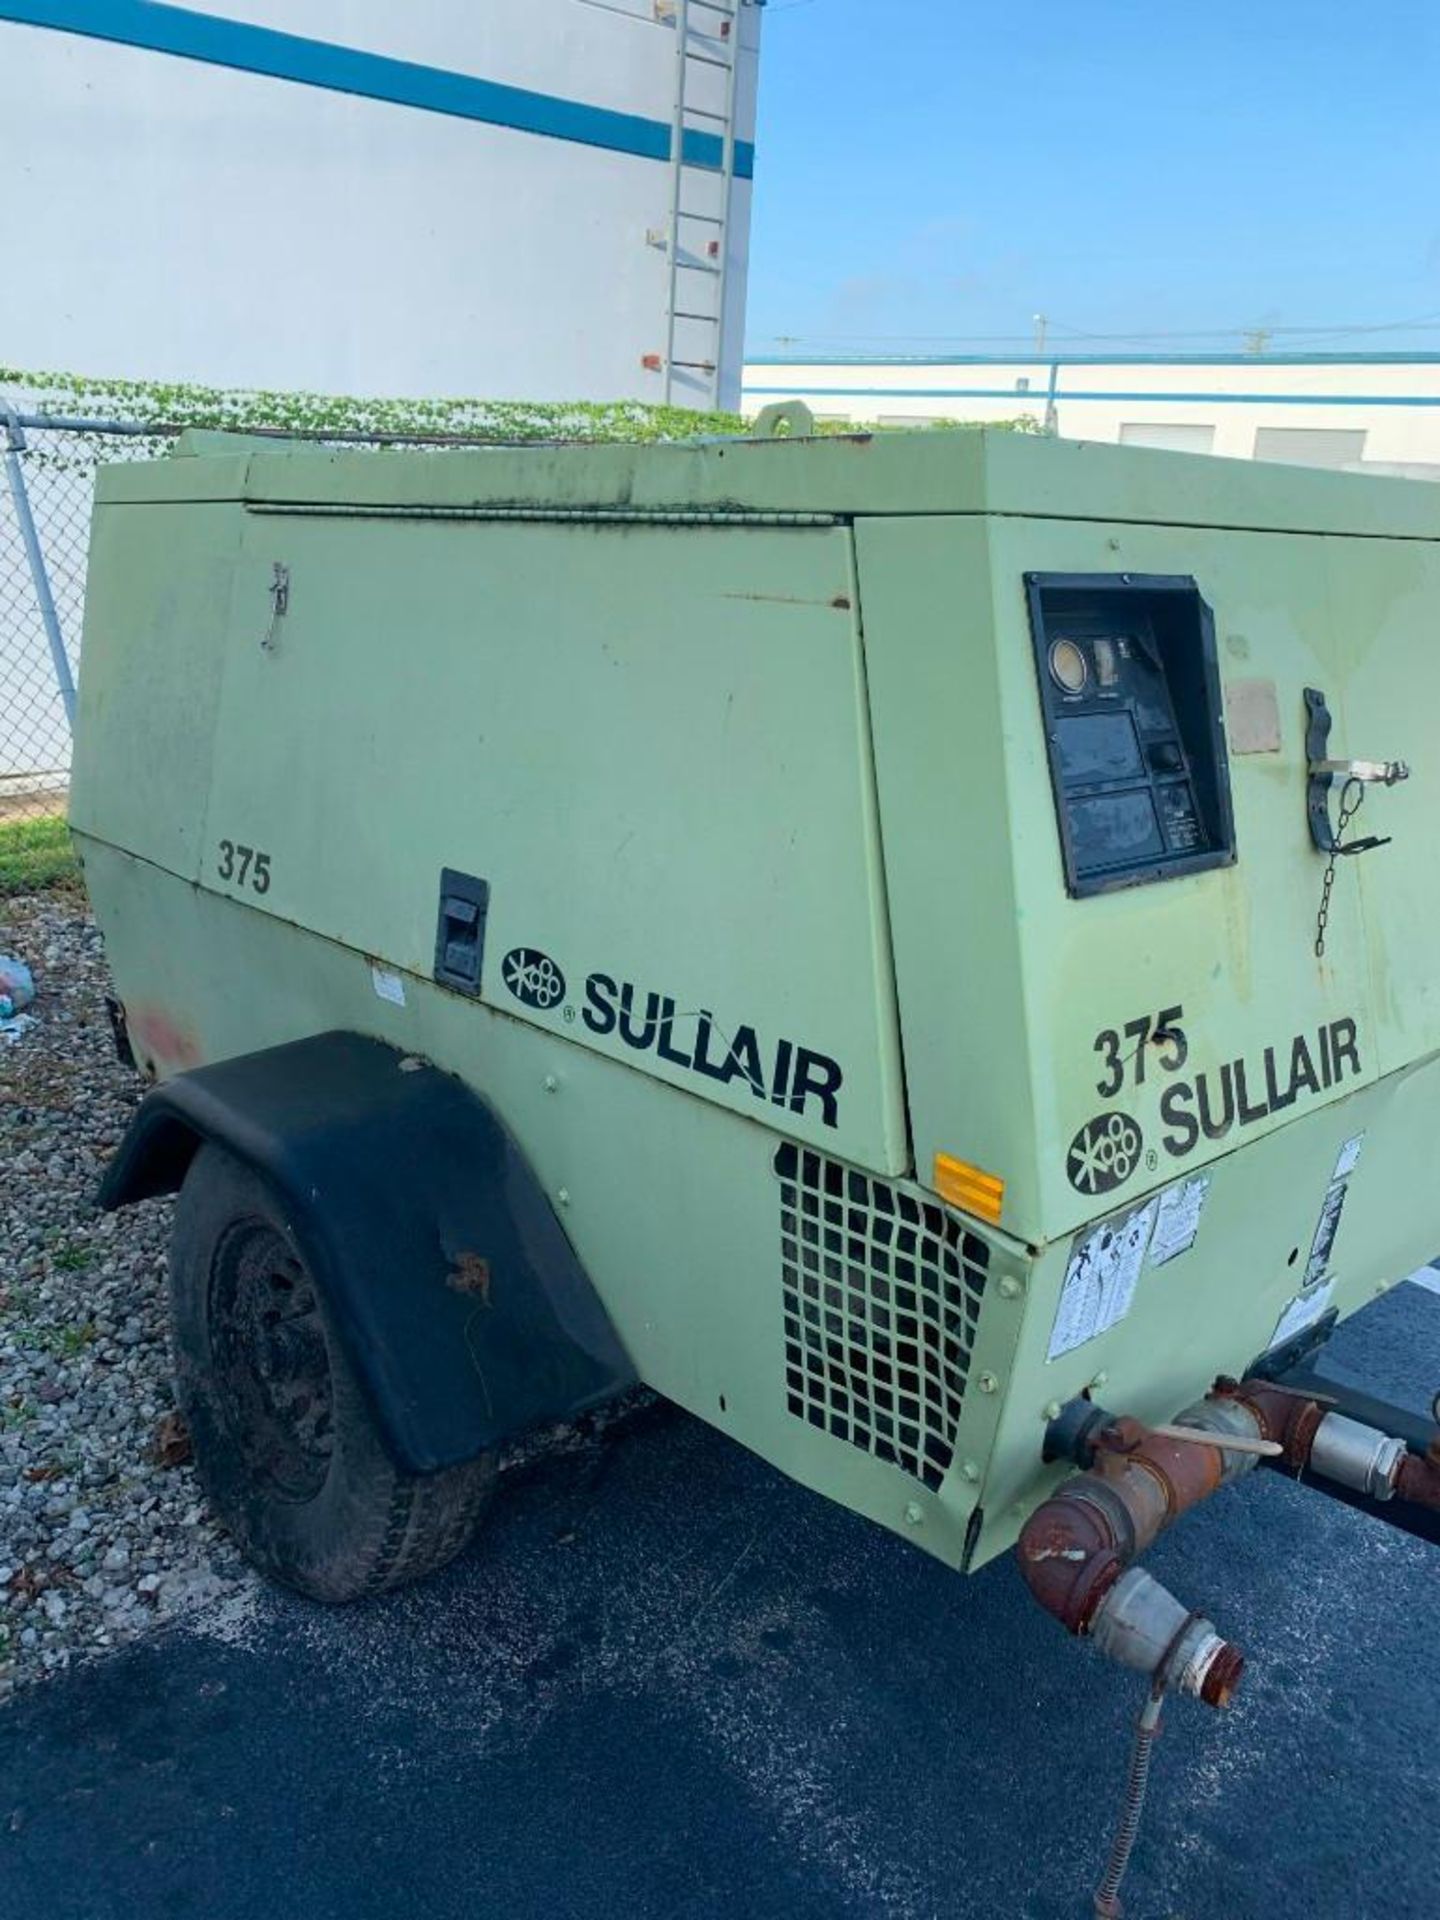 SULLAIR 375 AIR COMPRESSOR, DIESEL, JOHN DEERE ENGINE, TOW BEHIND, BILL OF SALE ONLY , CONDITION UNK - Image 2 of 12